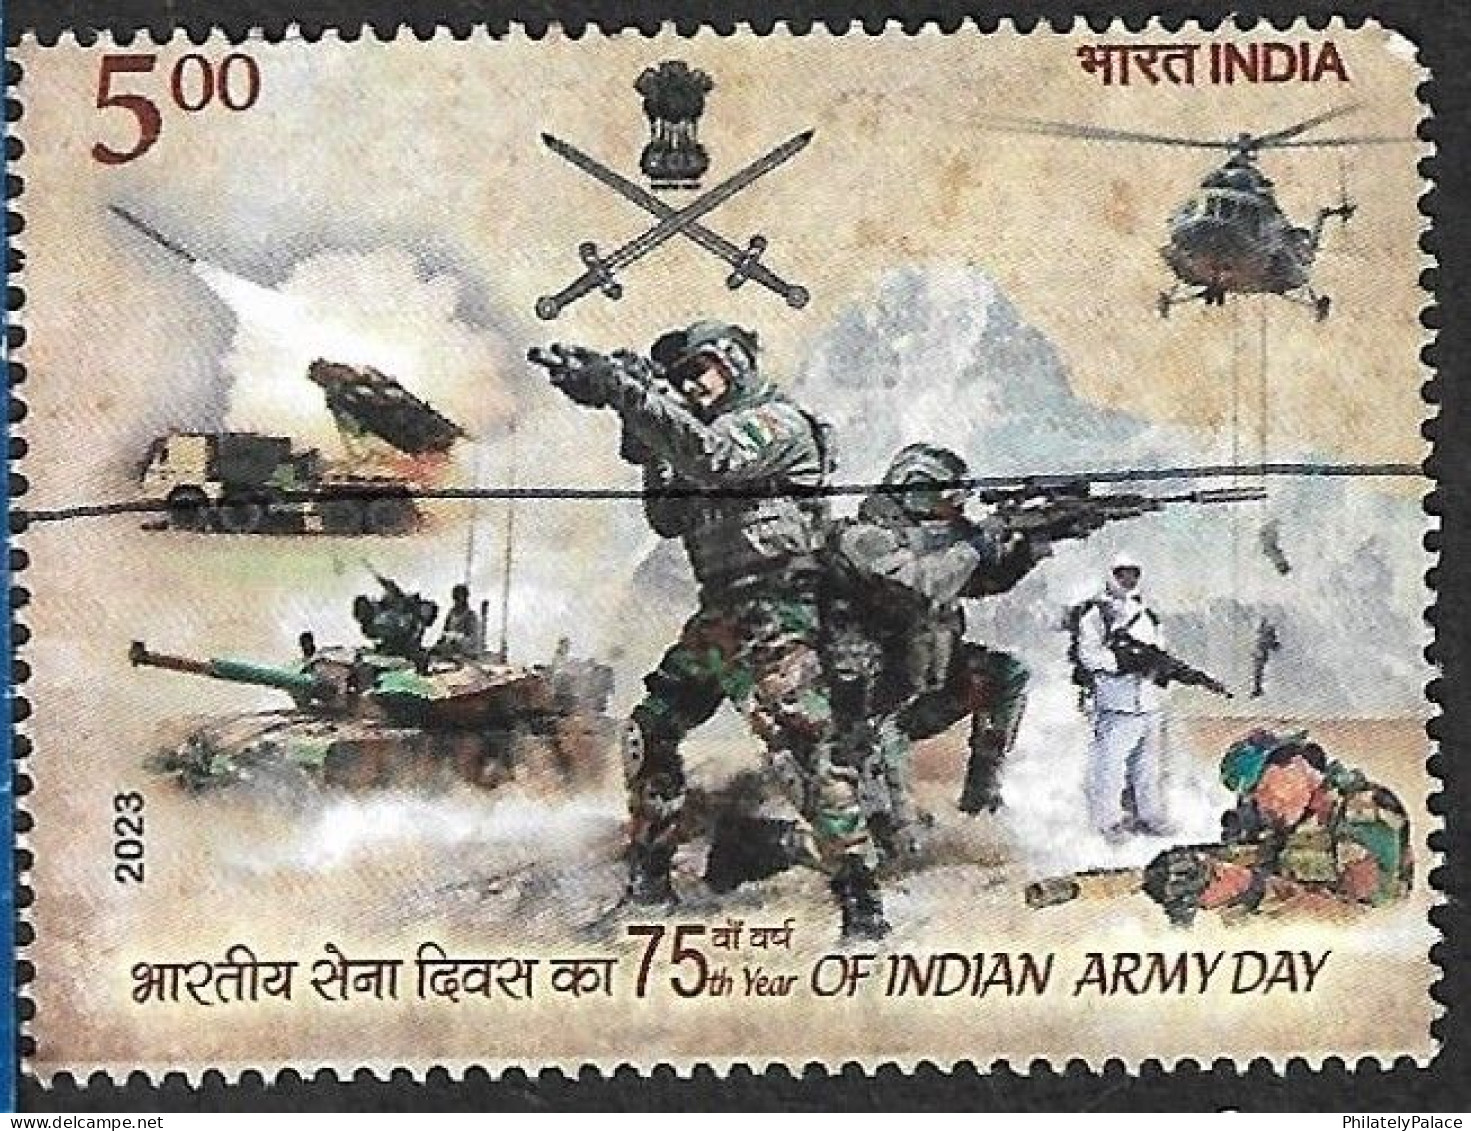 India 2023 Army,Helicopter,Arjun Tank MK III,Gun,Sword,Sniper,Paratroopers,Rocket, War Used PEN Cancelled, Inde Indien - Usados